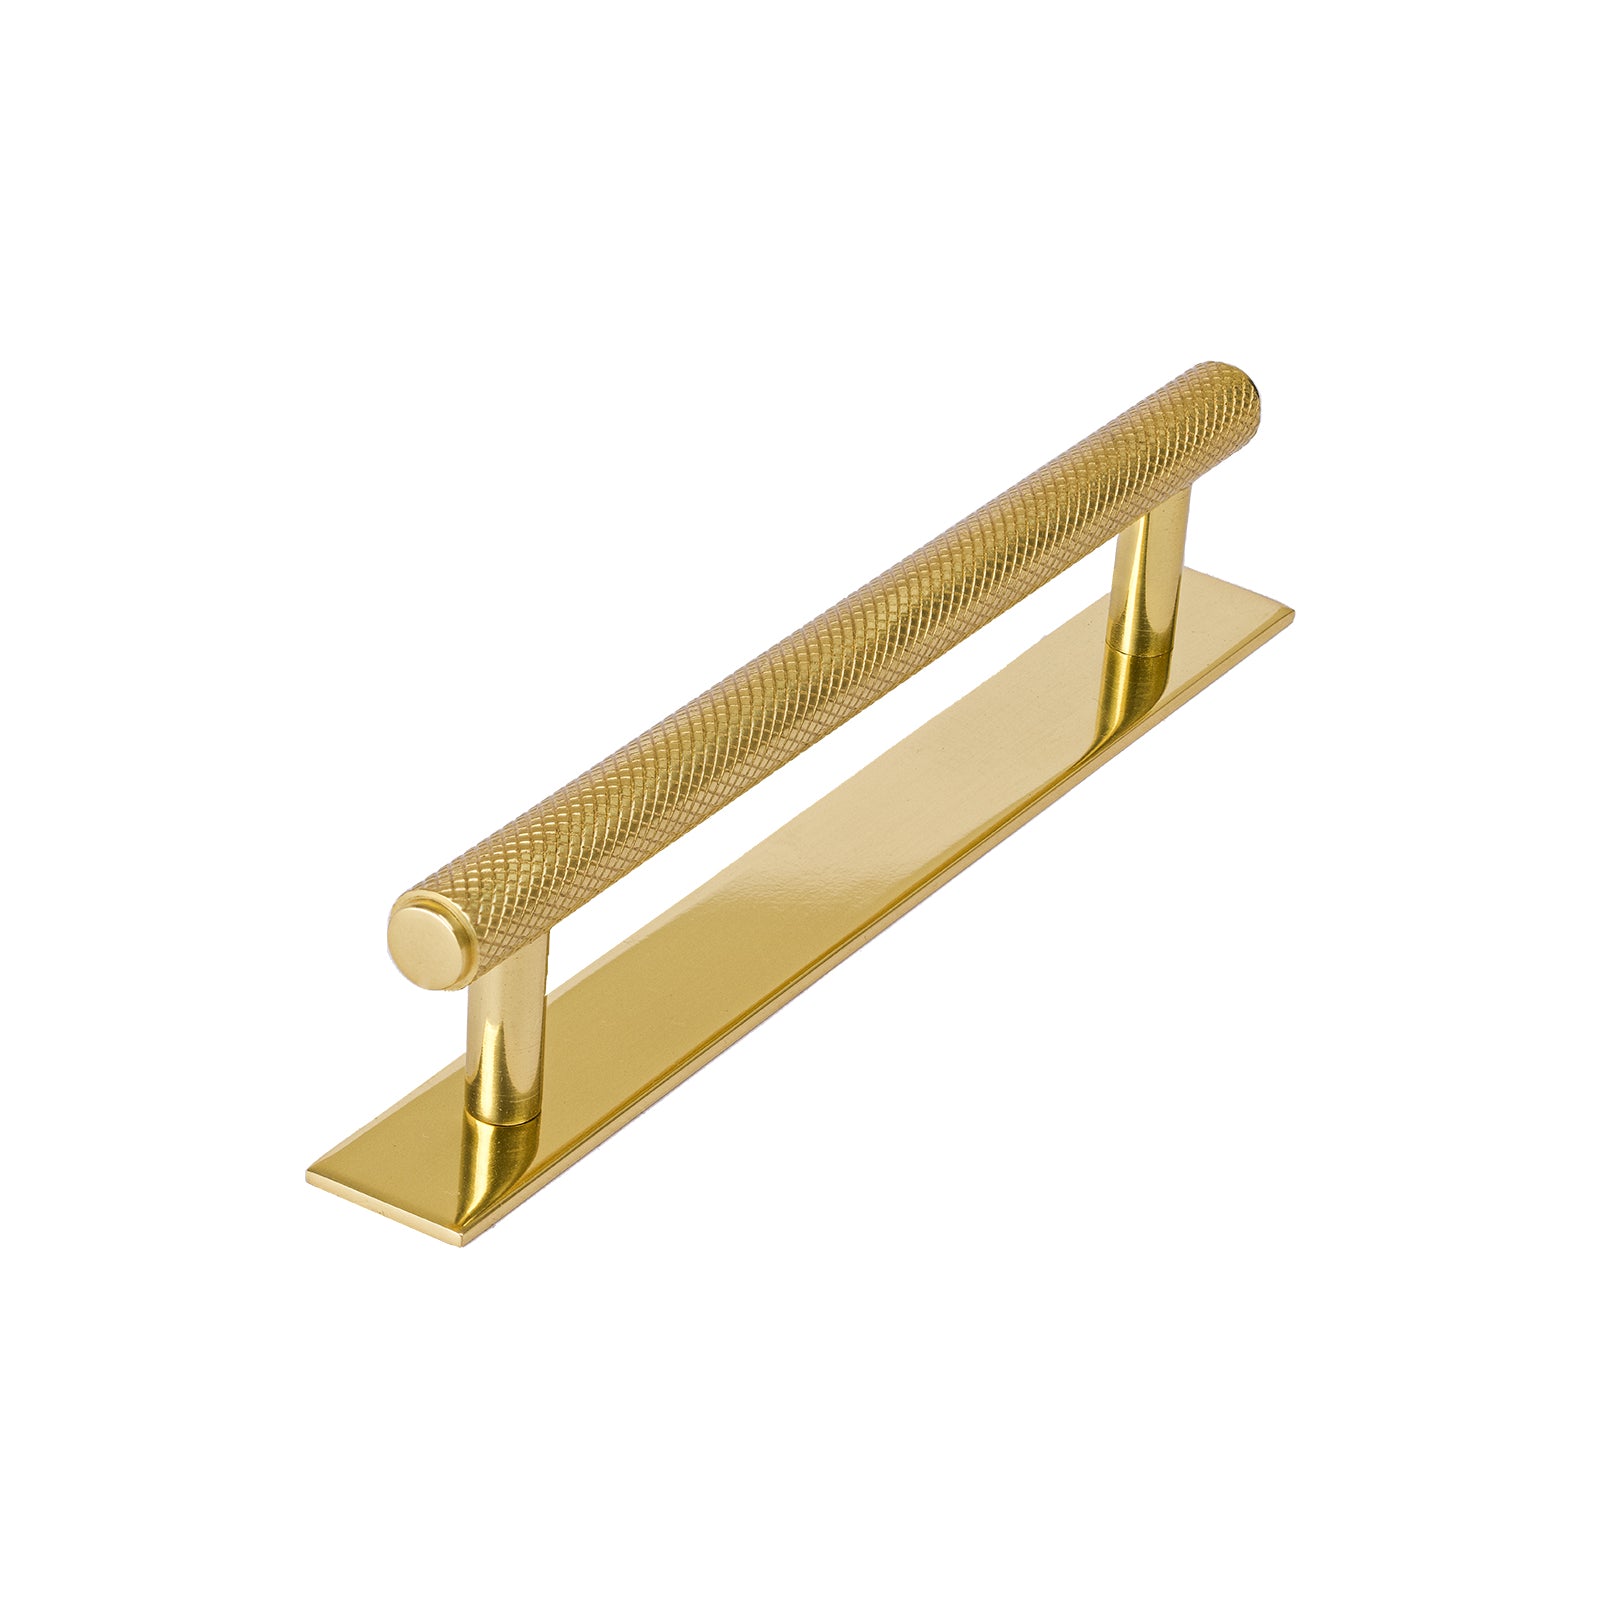 polished brass kitchen pull handle, knurled handles